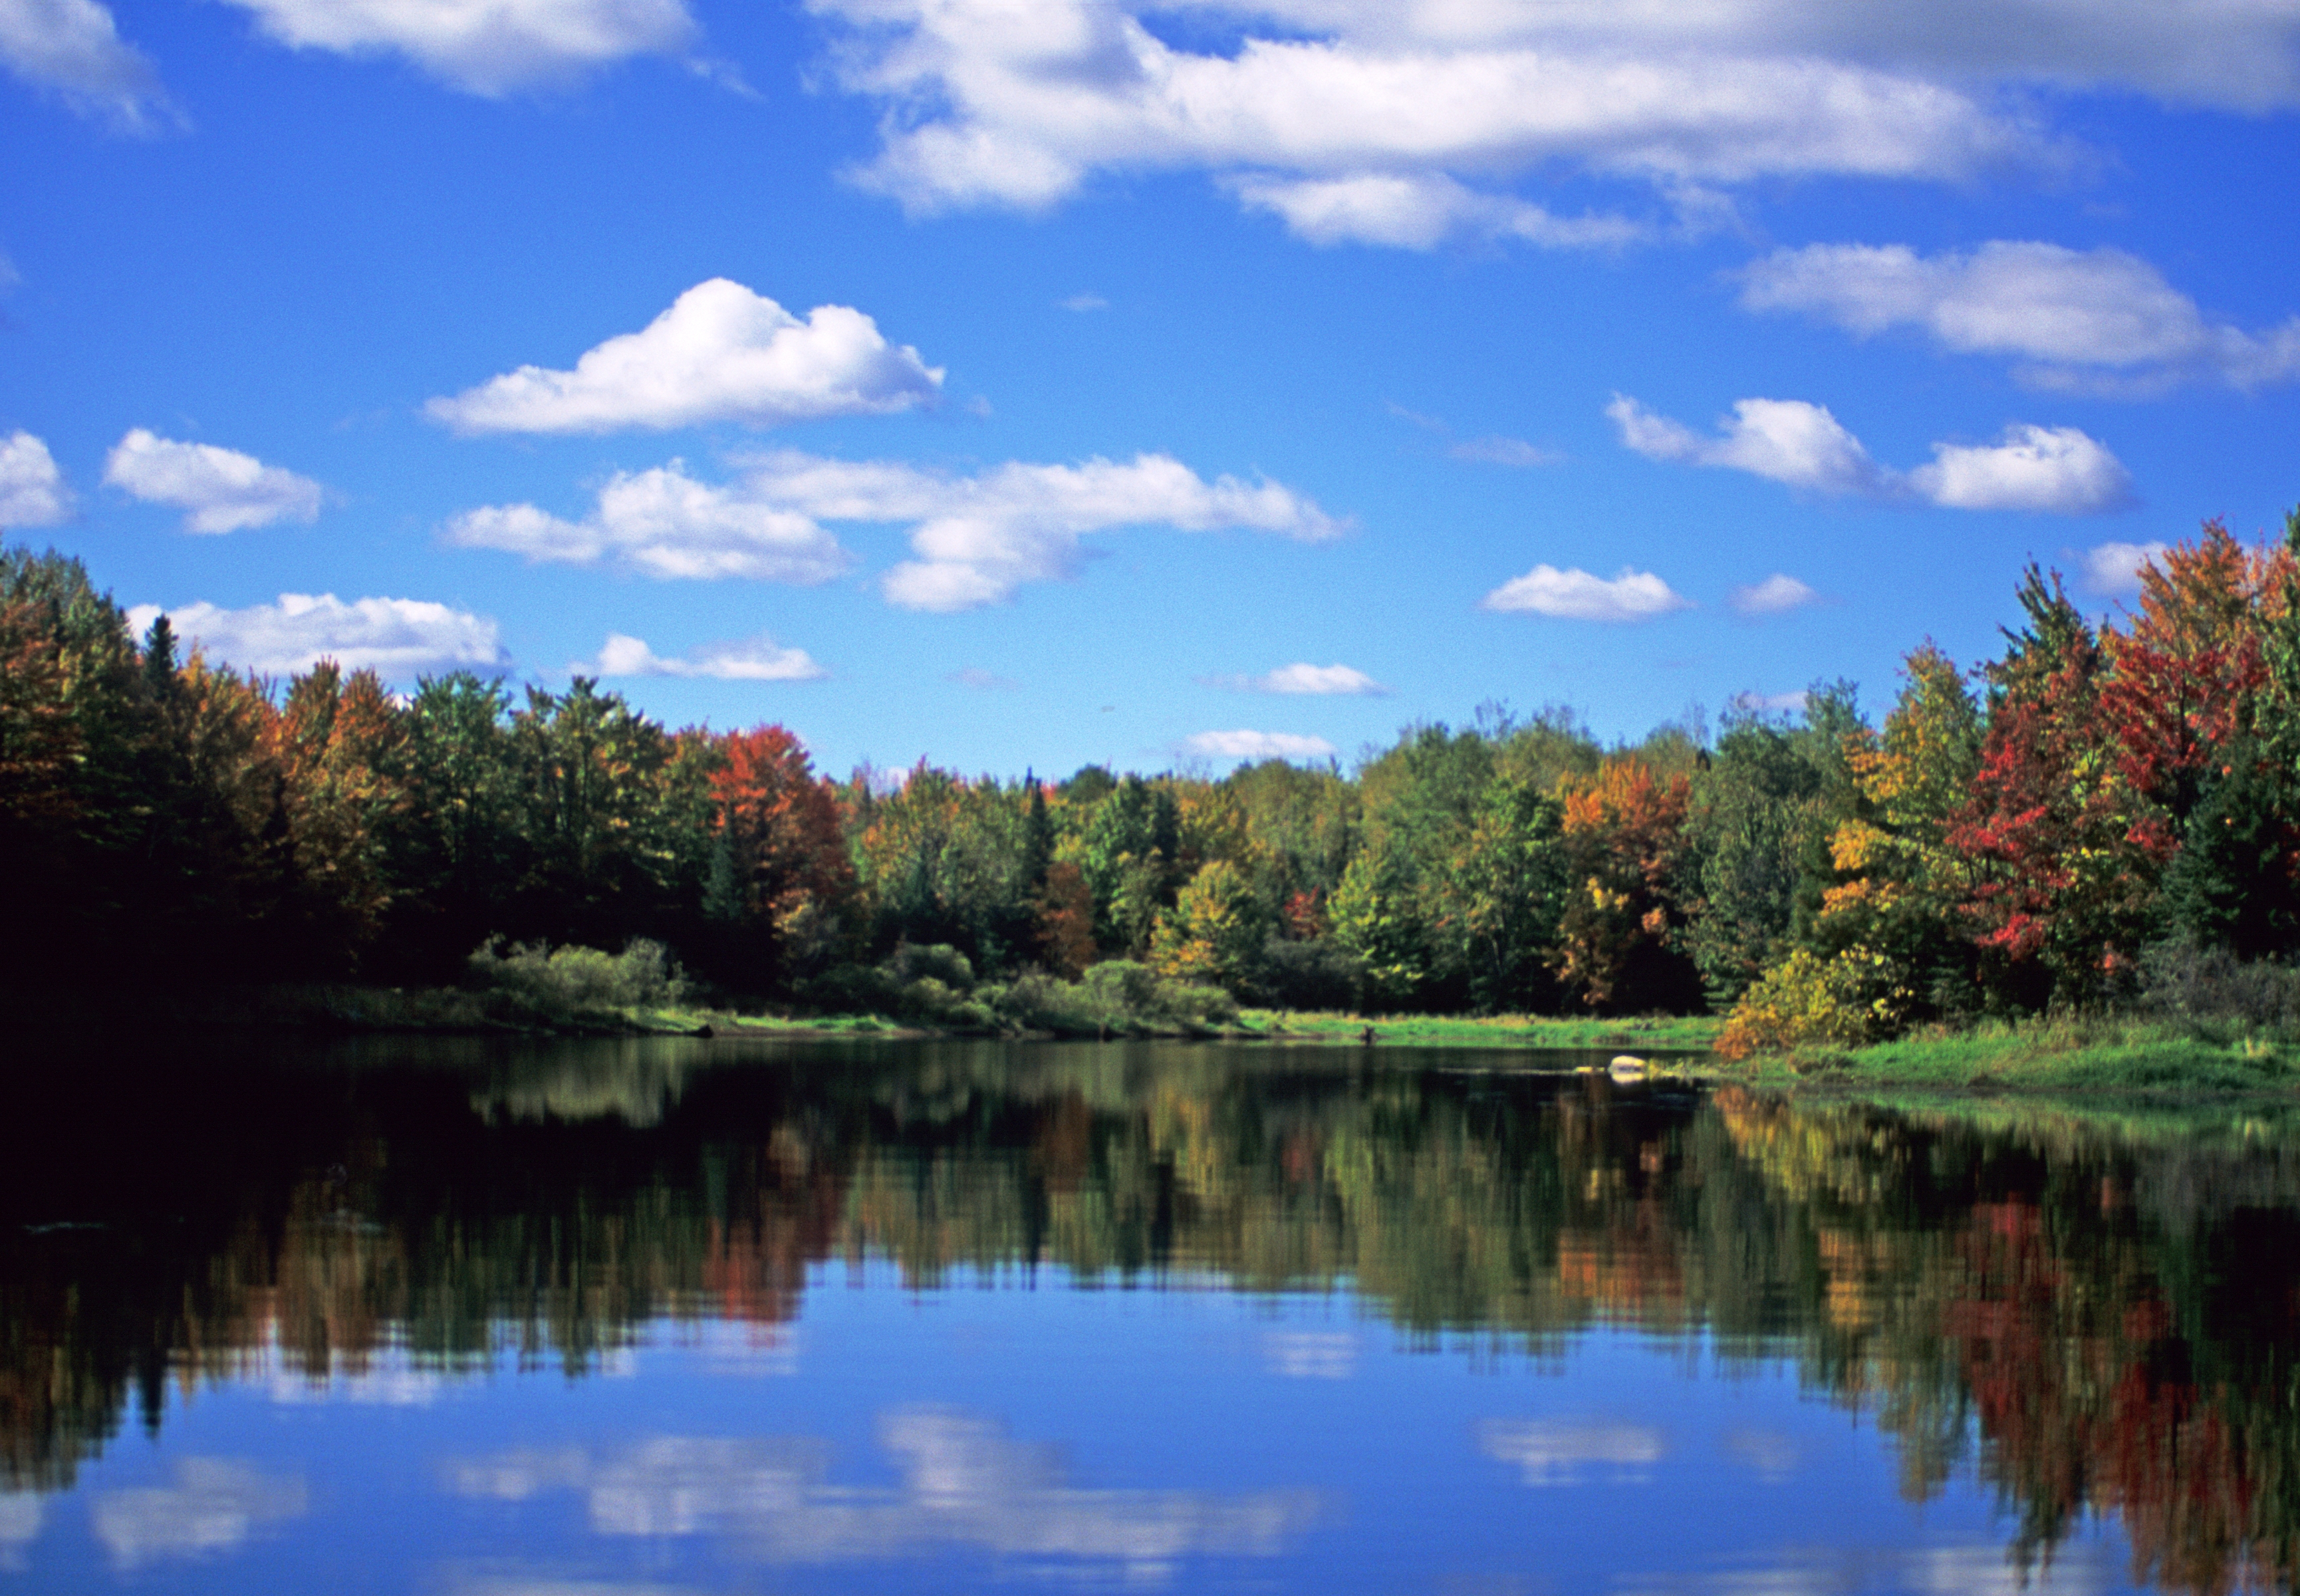 Willow Flowage Scenic Waters Area. Photo from the Wisconsin Department of Natural Resources (CC BY-ND 2.0)